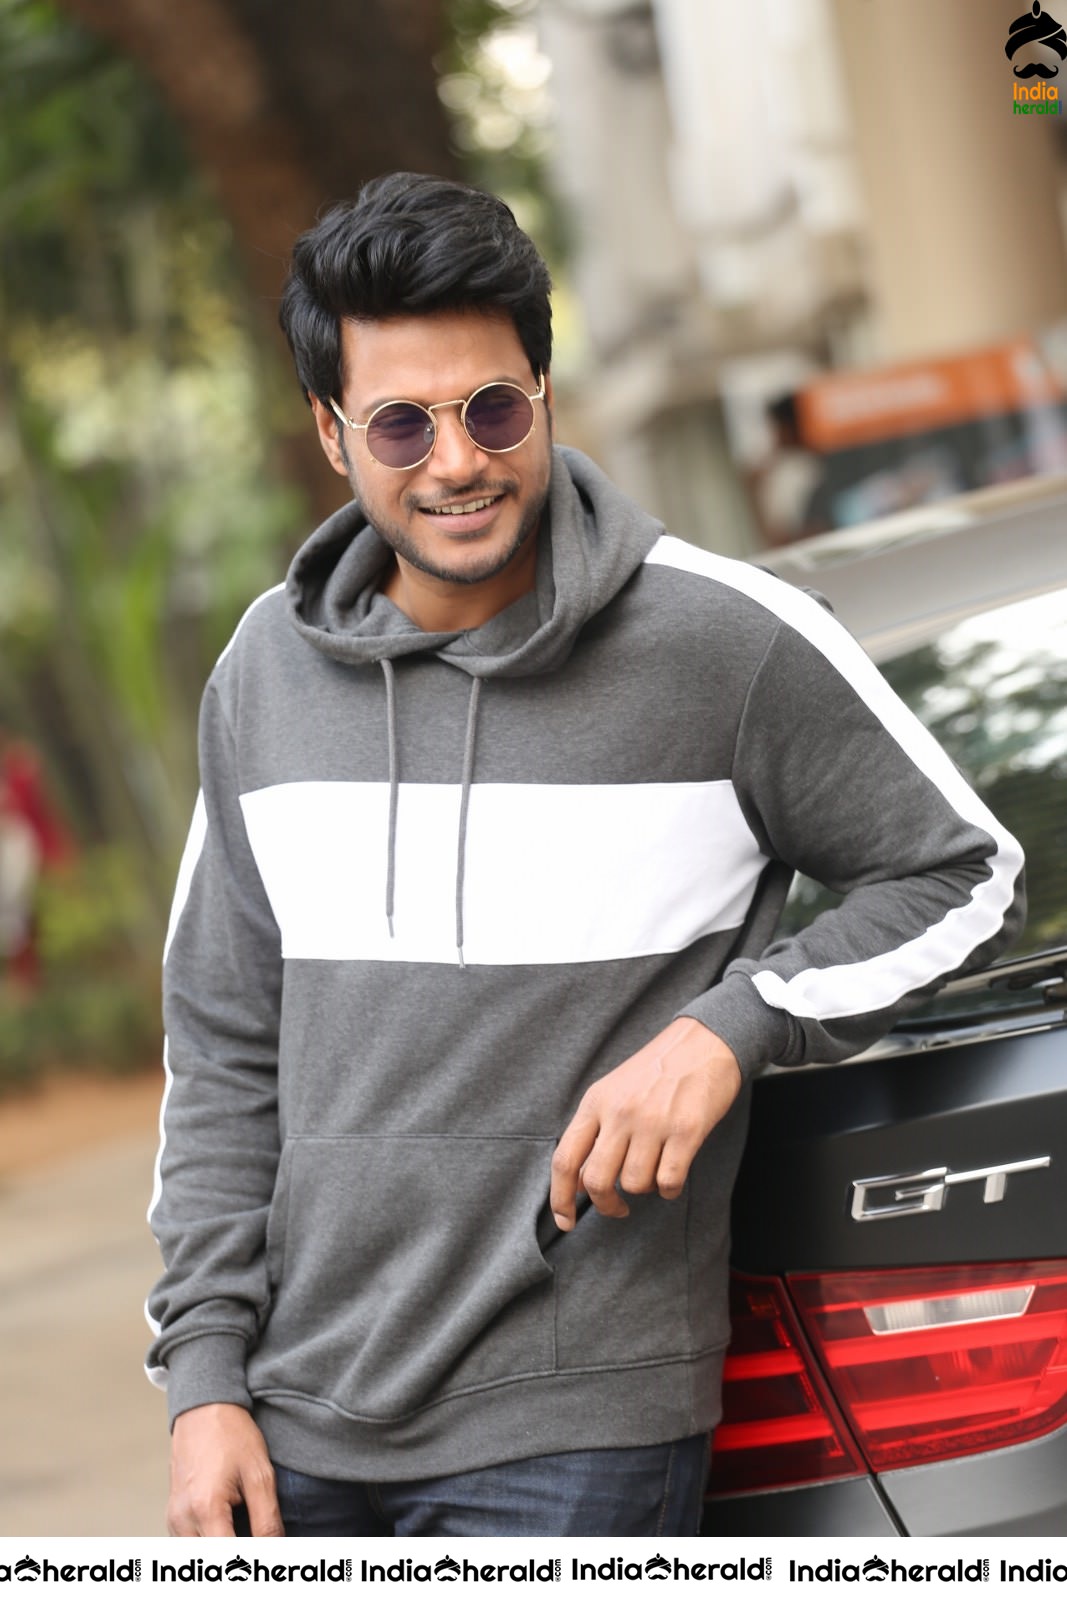 Sundeep looking Stylish in these Latest Clicks